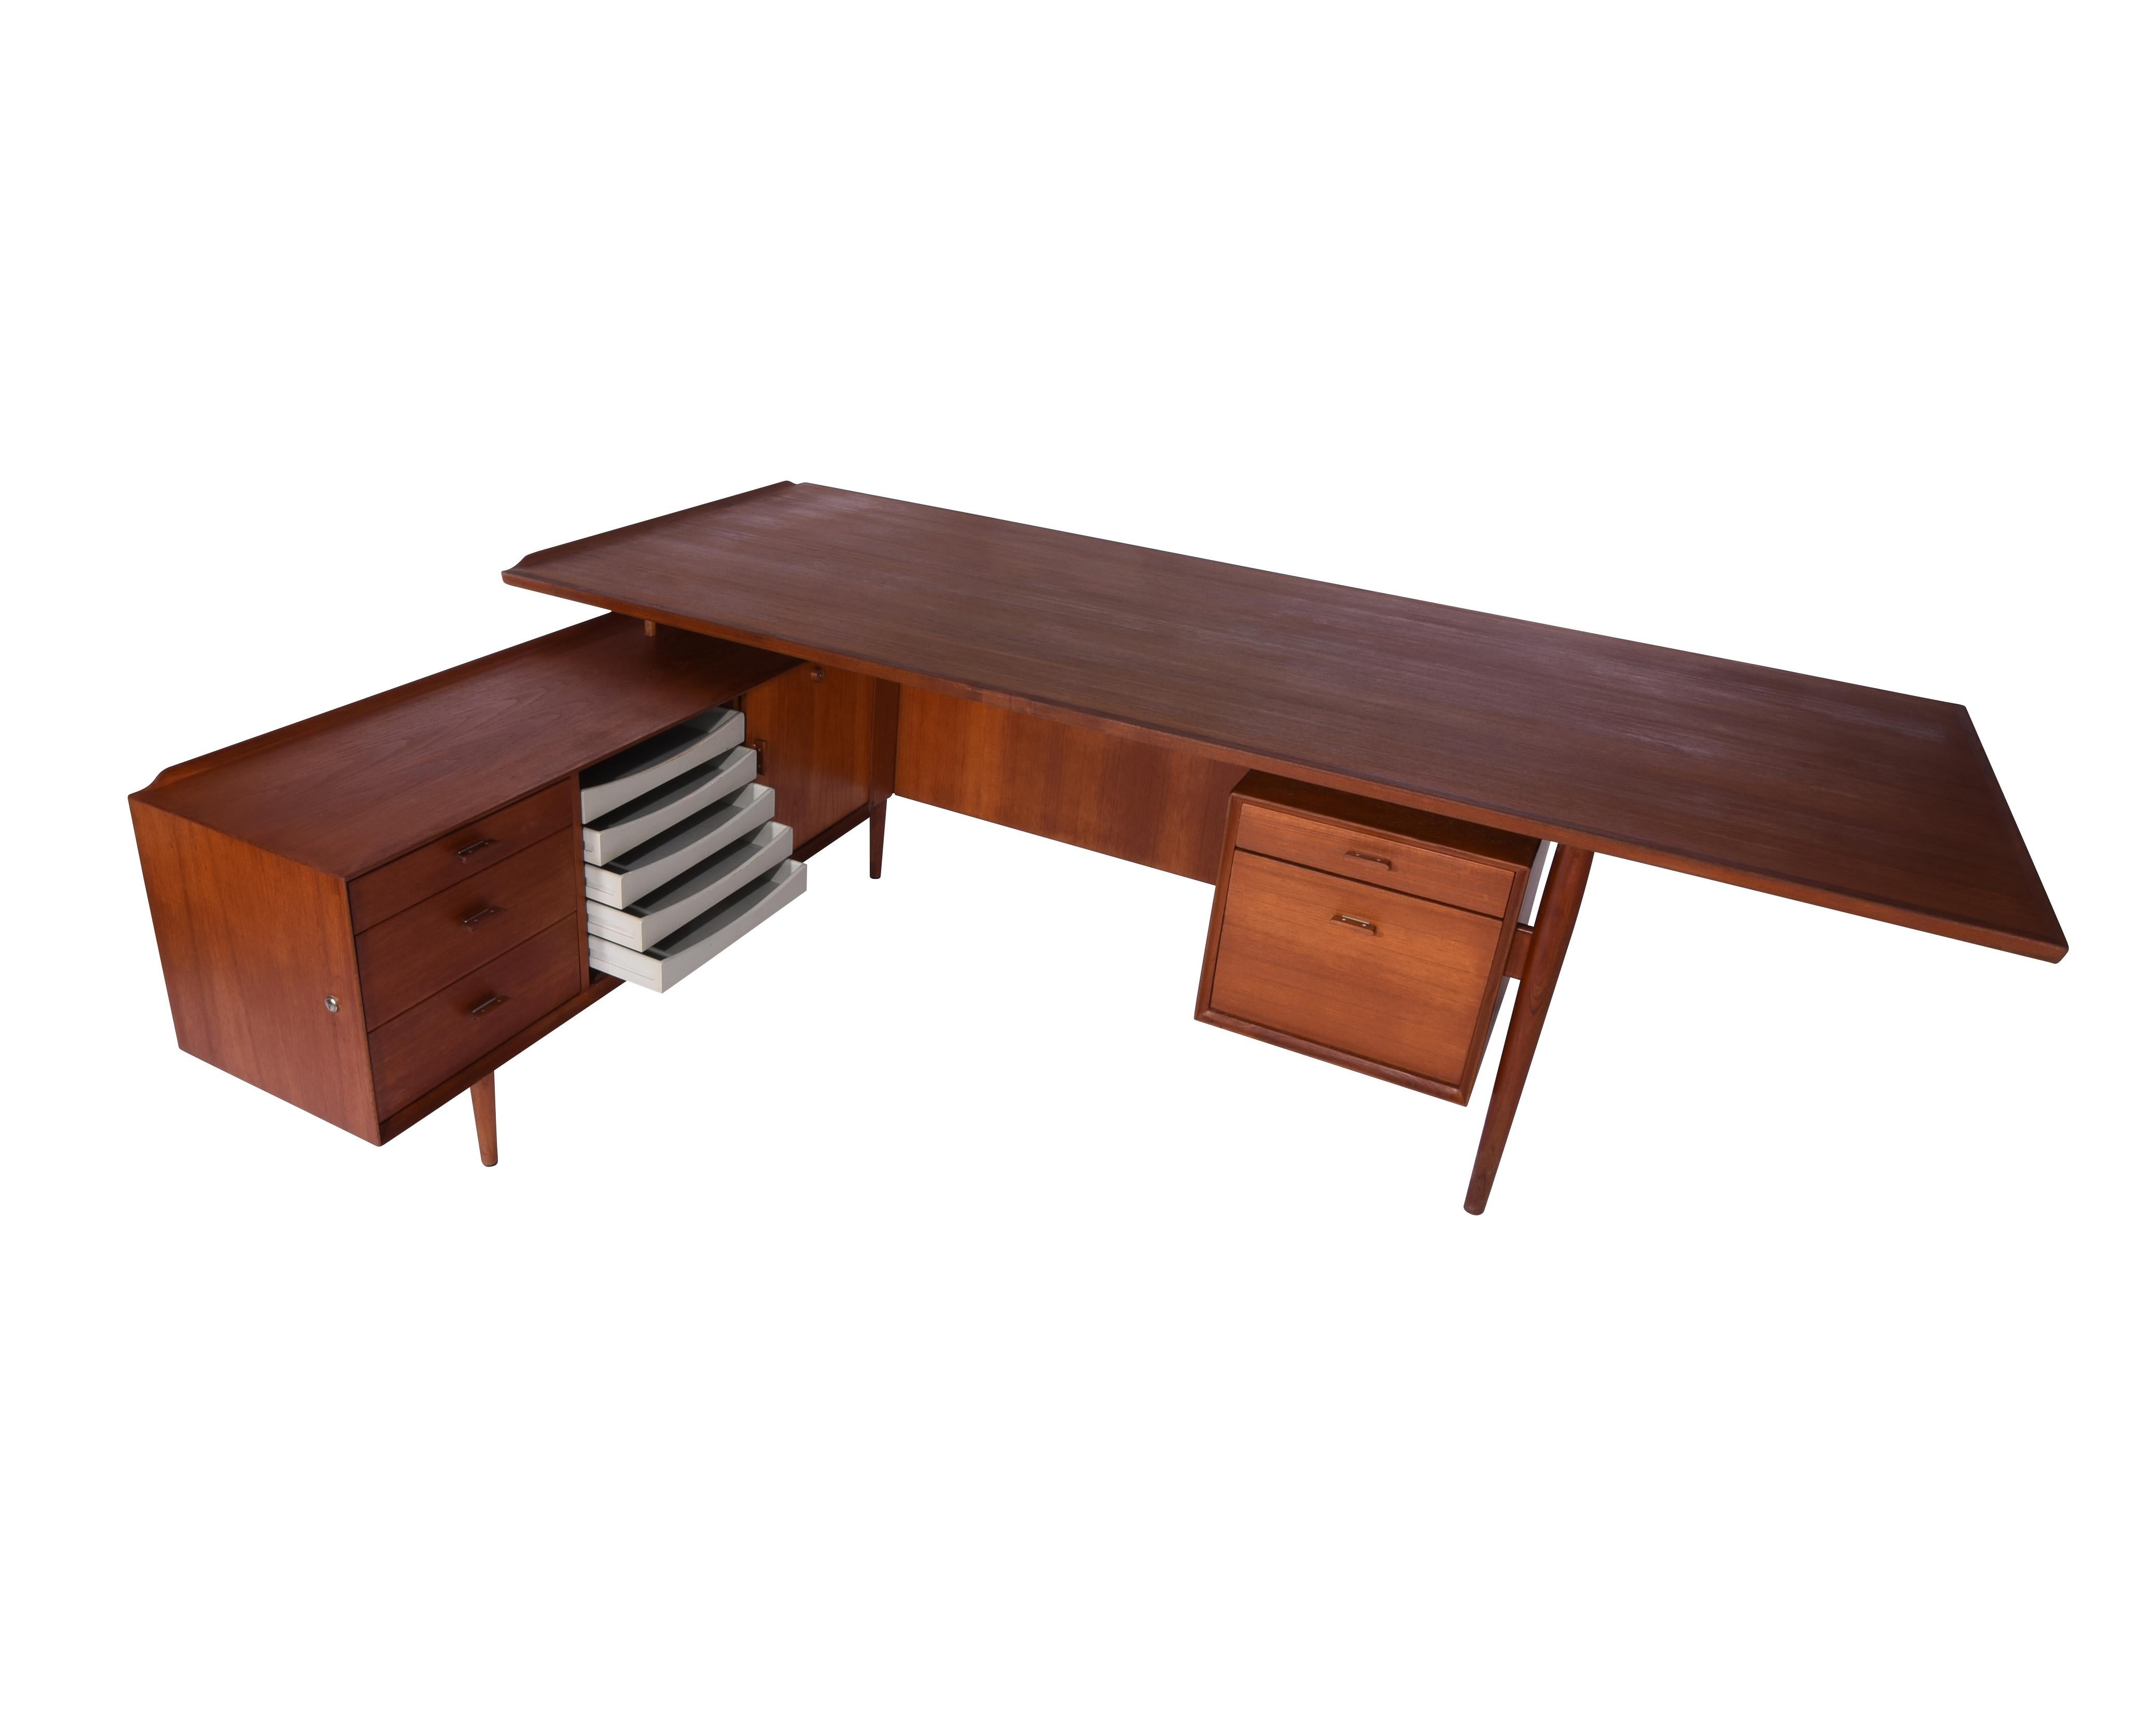 Teak executive desk by Arne Vodder for Sibast. Made in Denmark, circa 1960s. This is the rare 8 foot long desktop model which cantilevers at one end. Meticulously restored and ready to for use.

Desk measures 89 in long x 41 in deep x 29 in